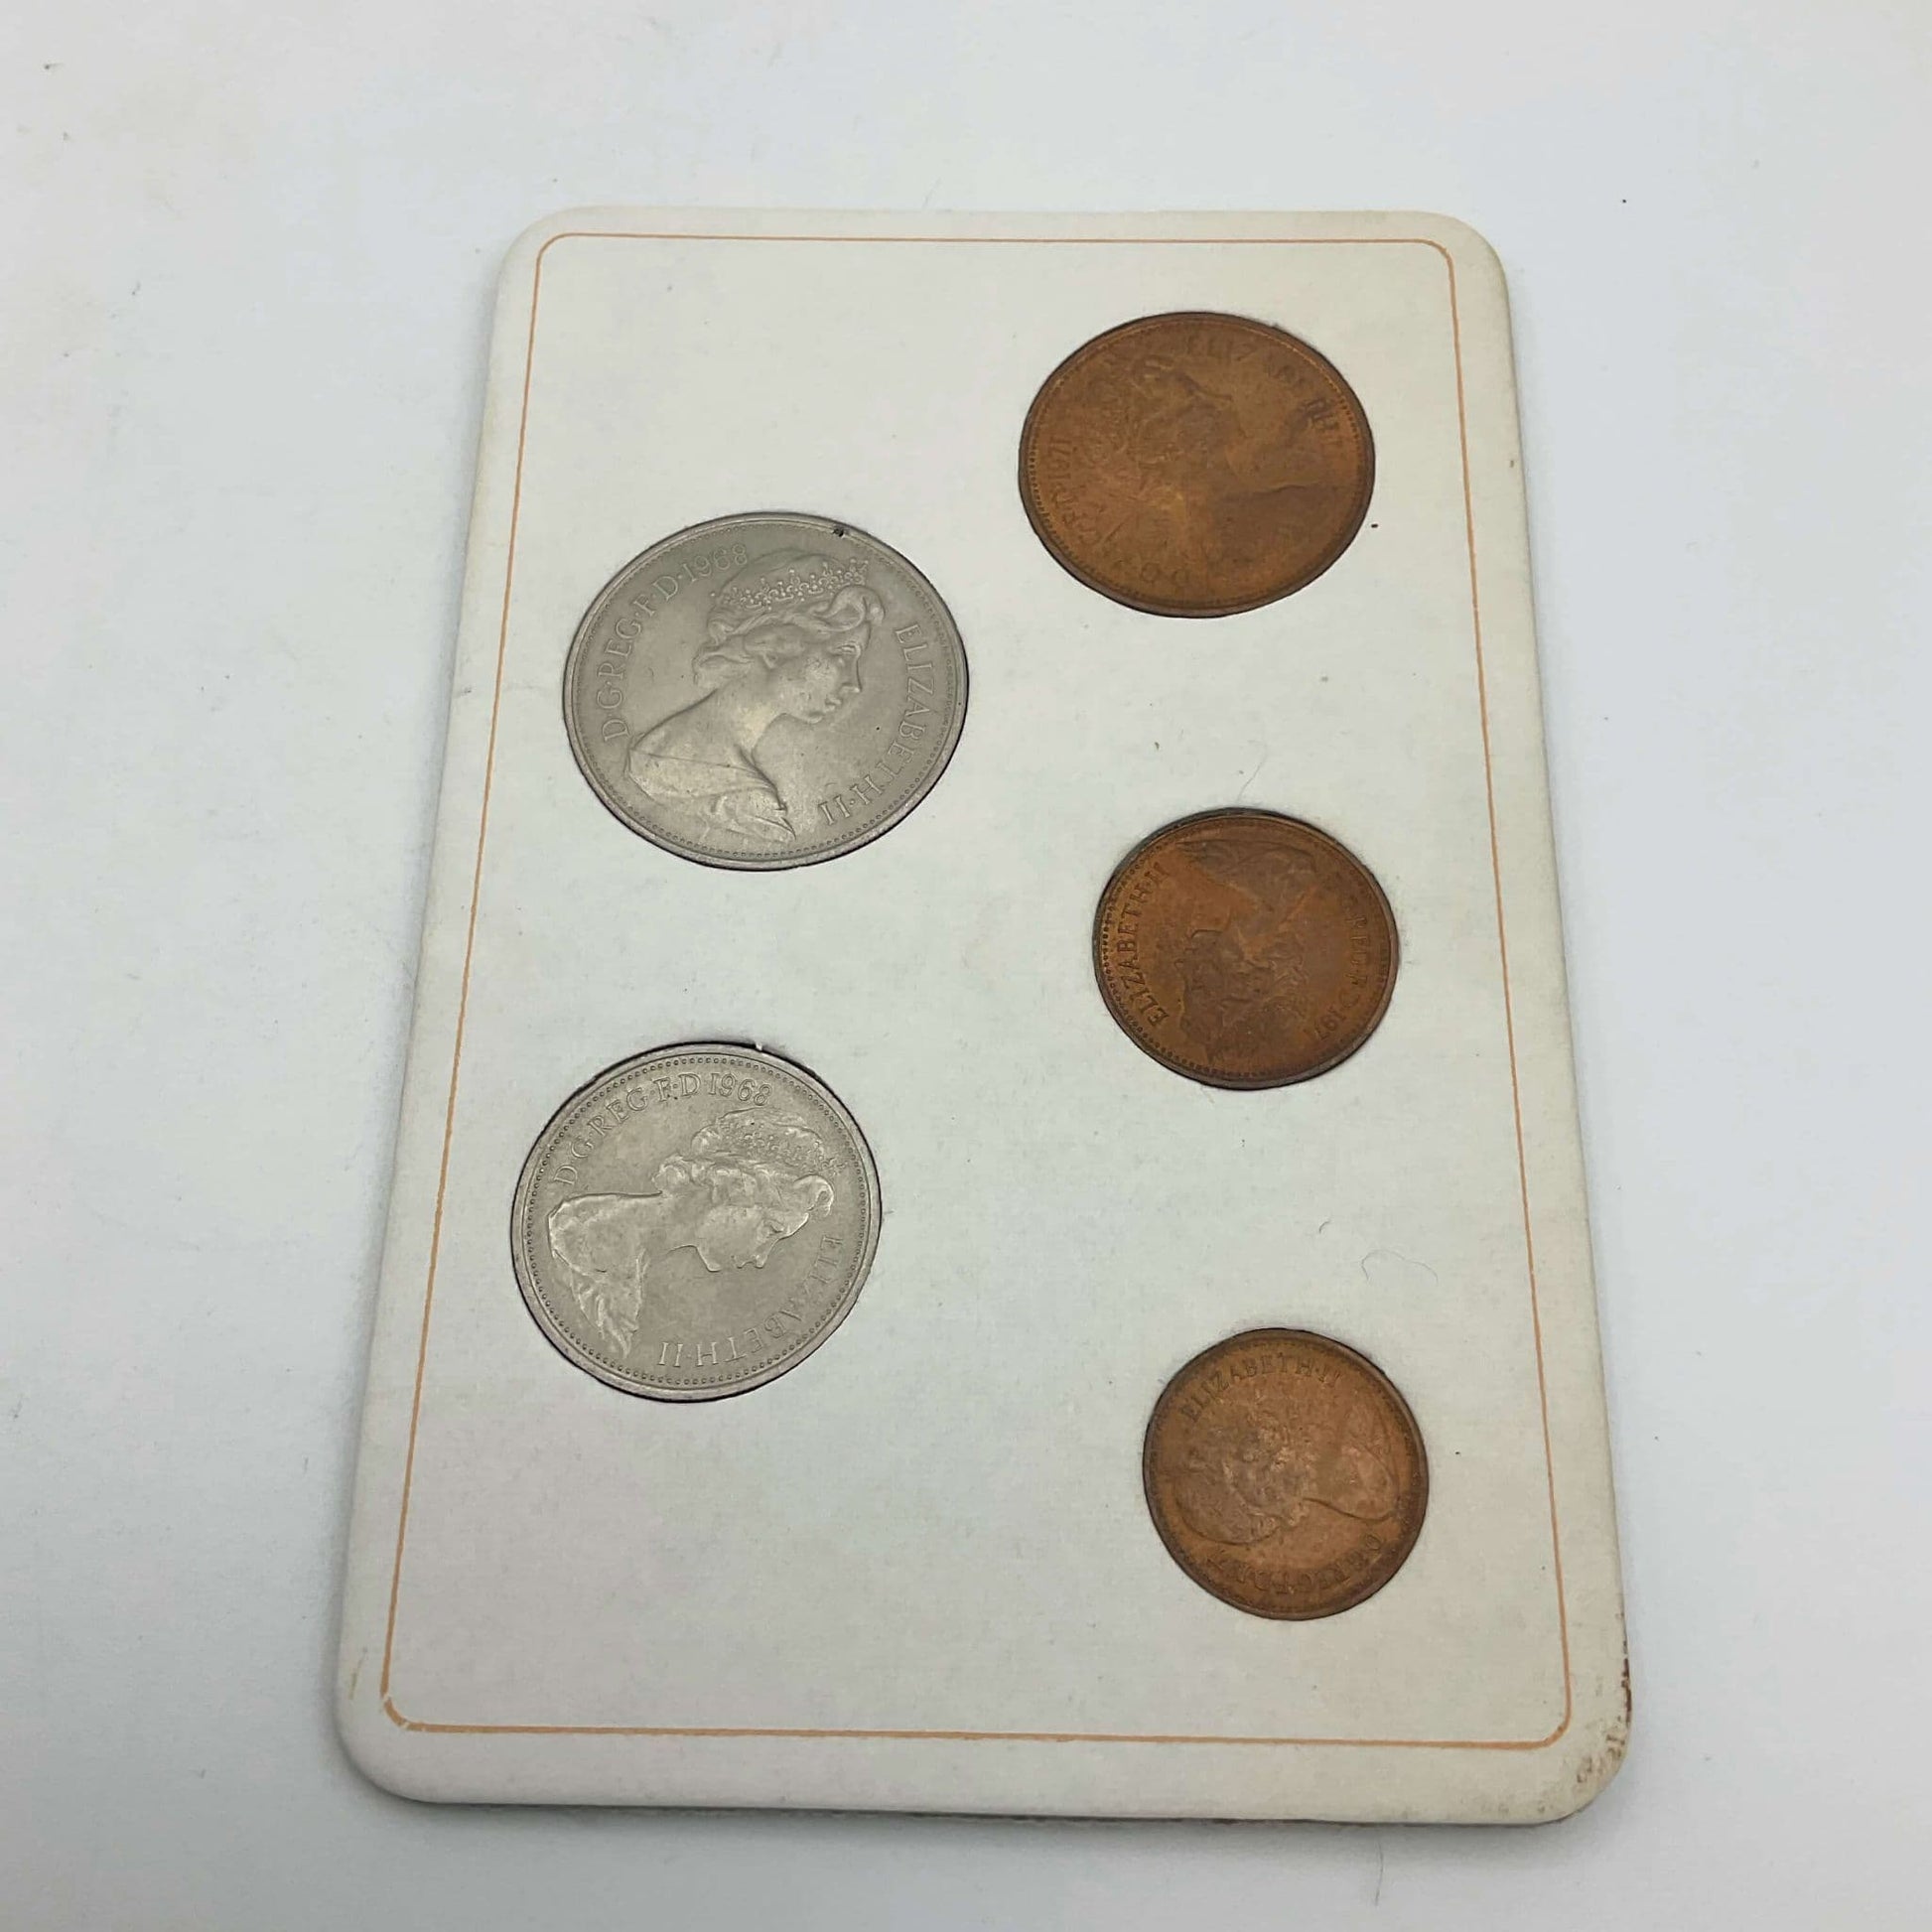 The reverse view of the coins in Britain's First Decimal Coins Set